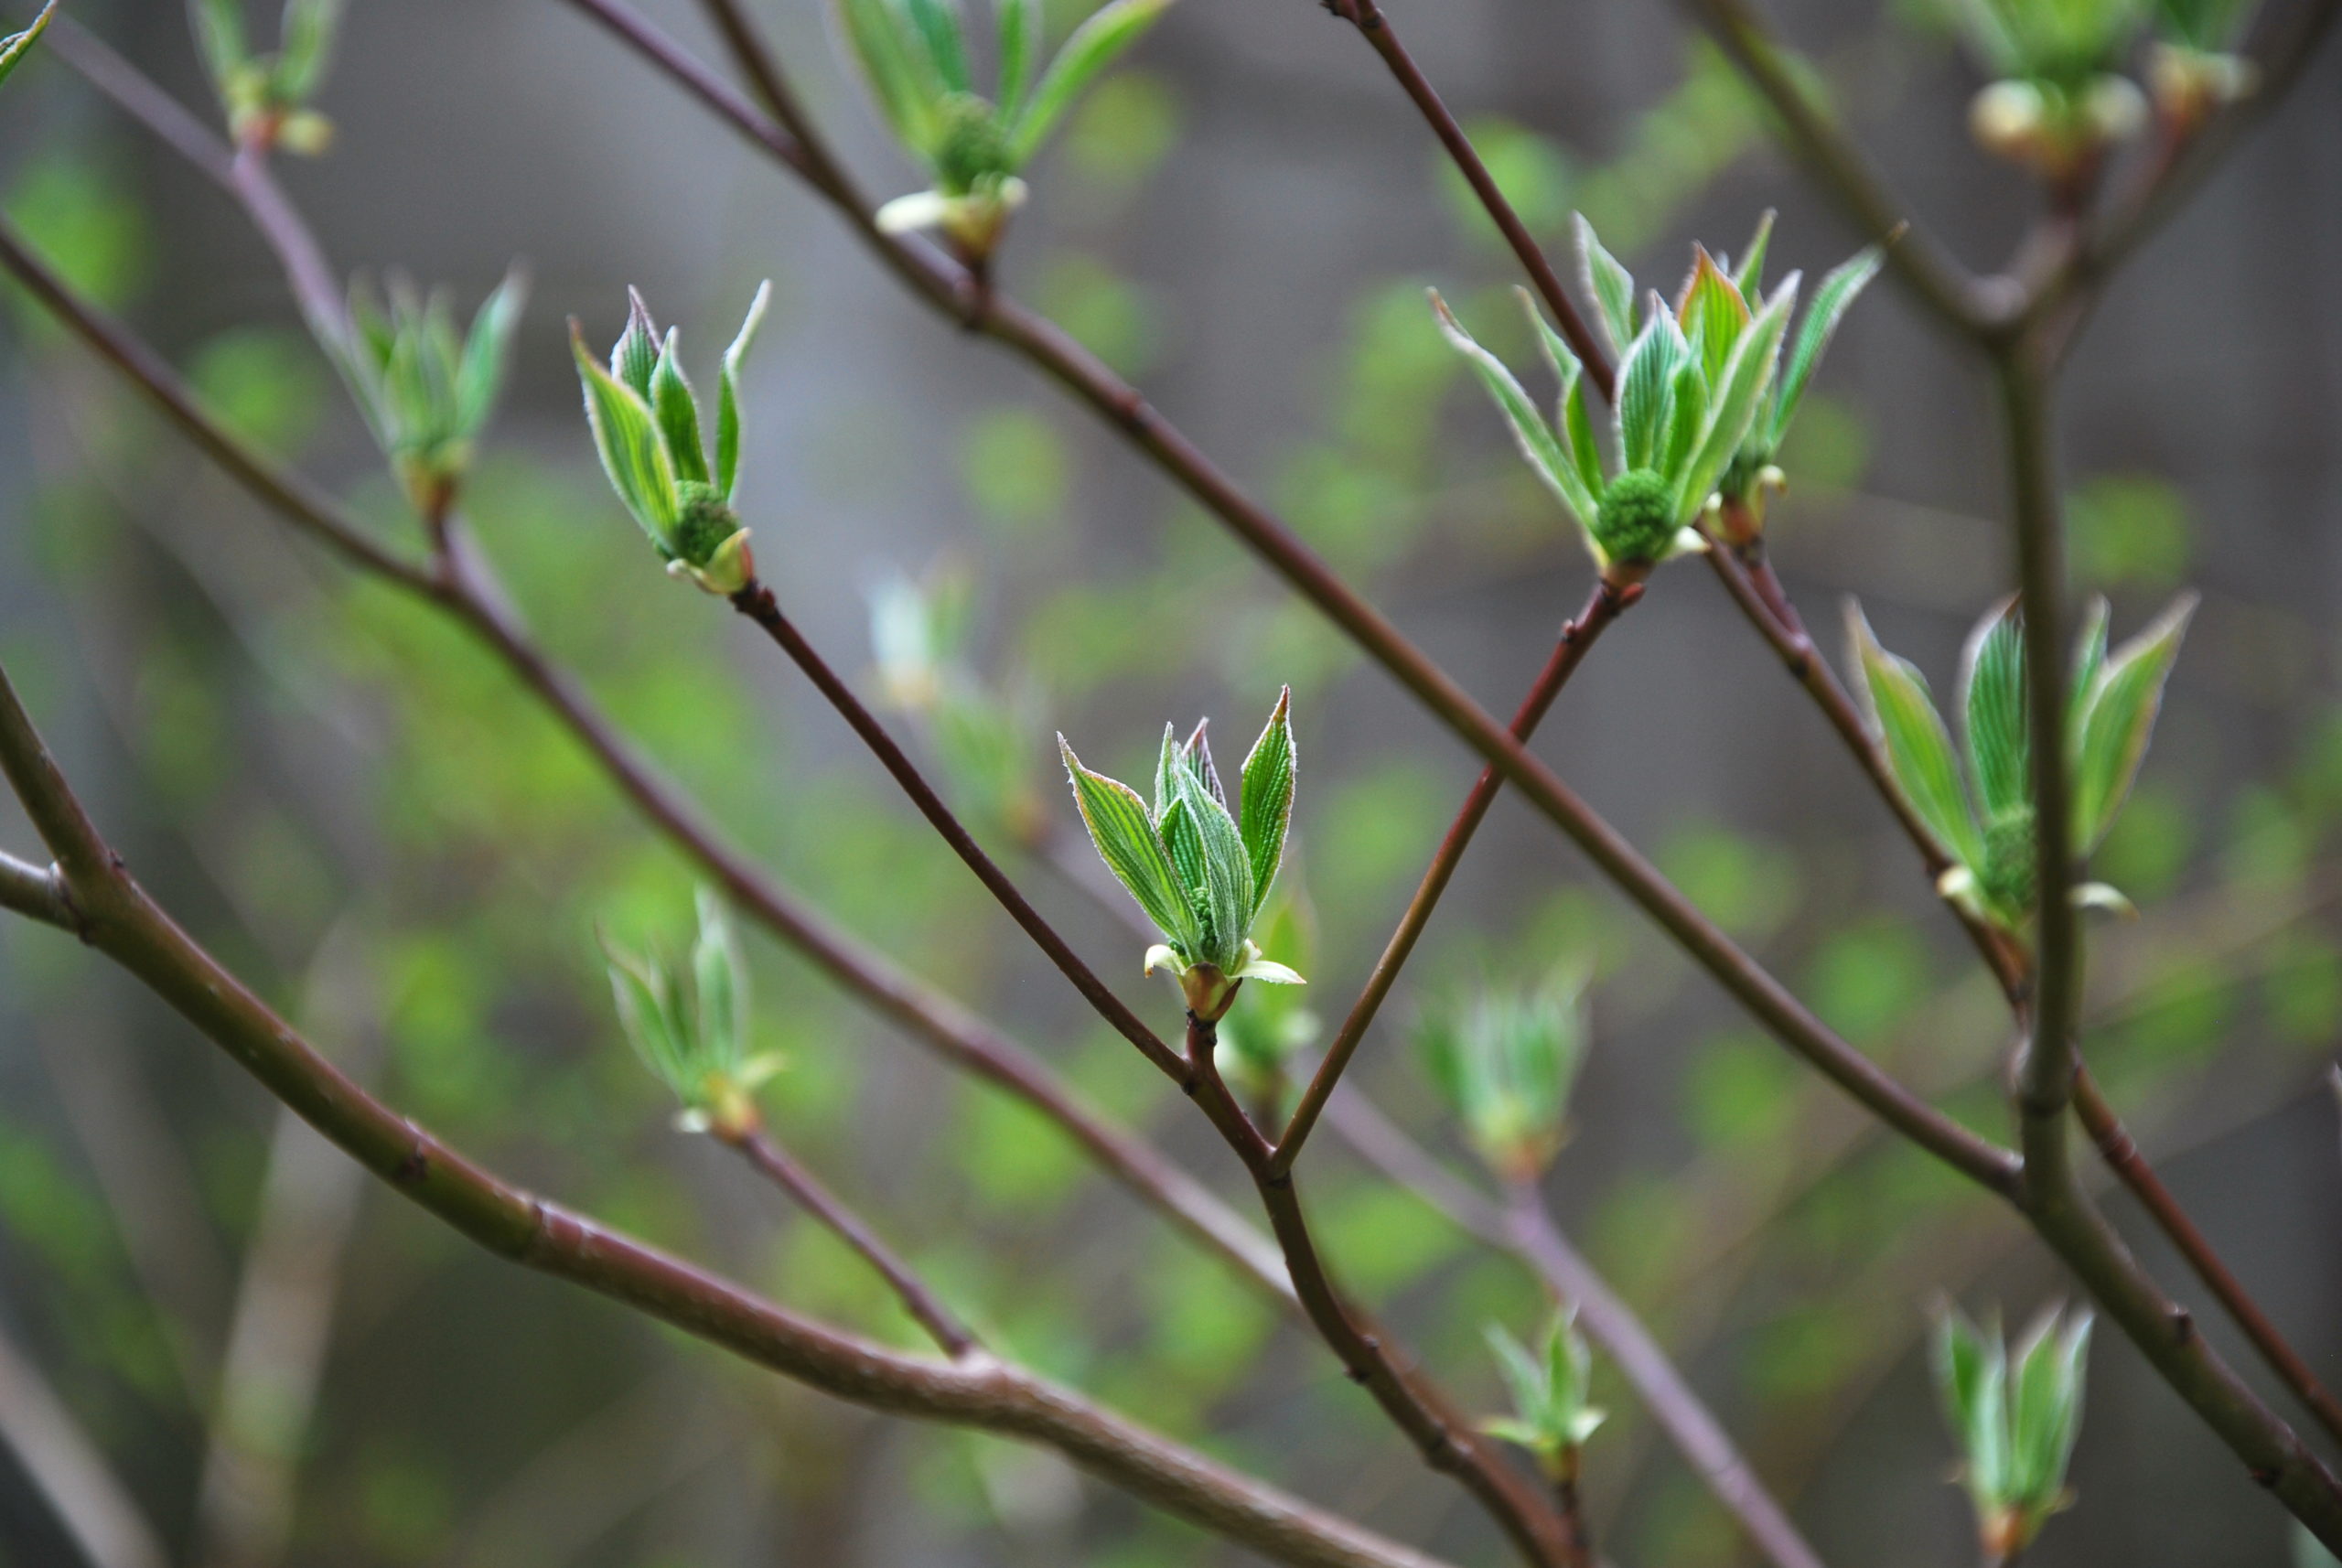 Budding leaves on branch